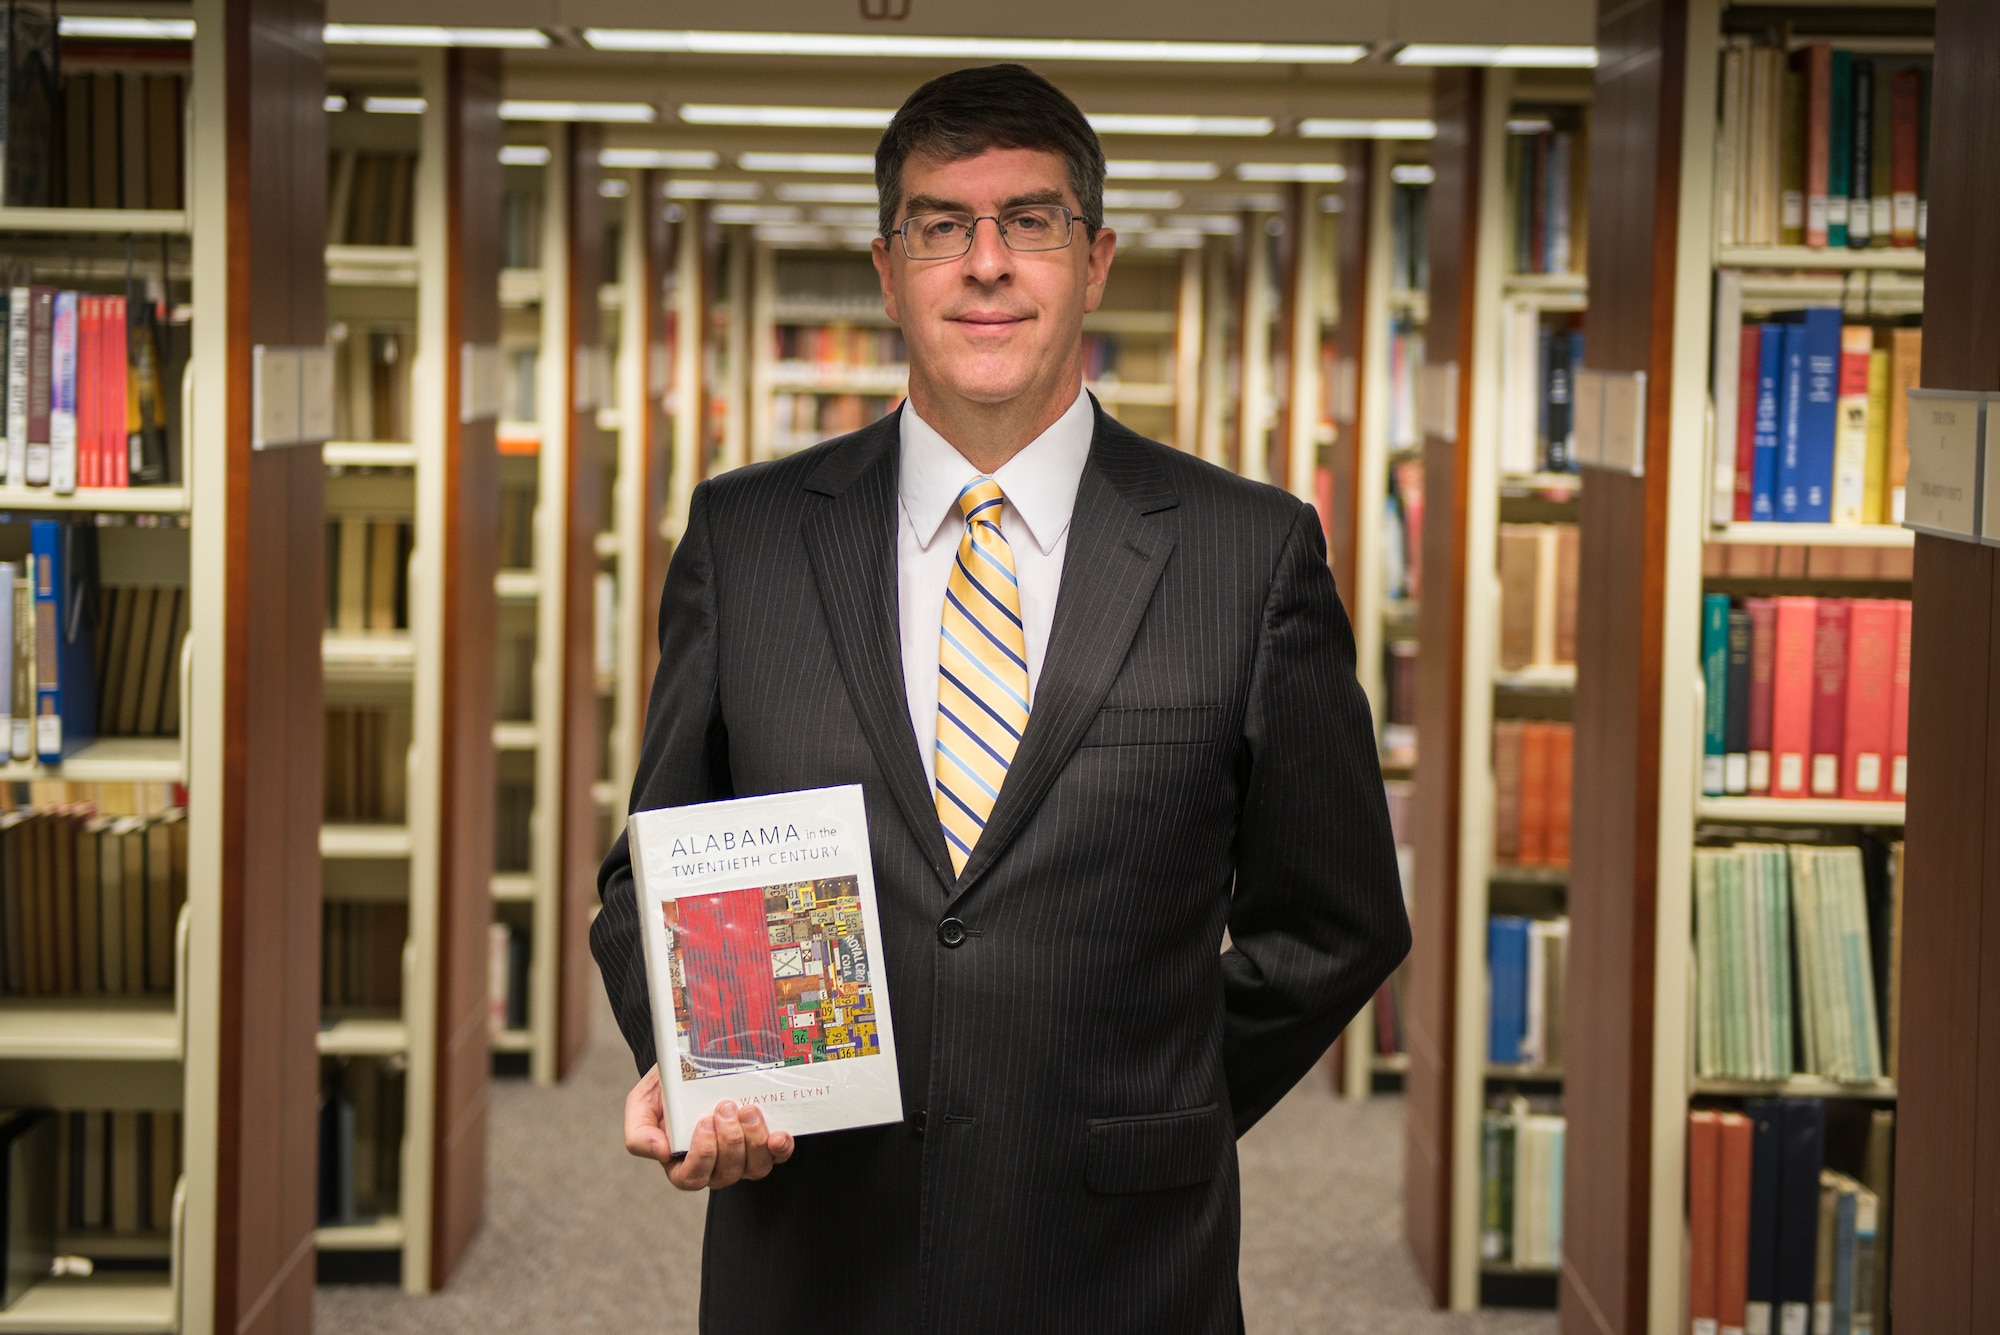 New MSFRIC director stands among the book shelves of the library.